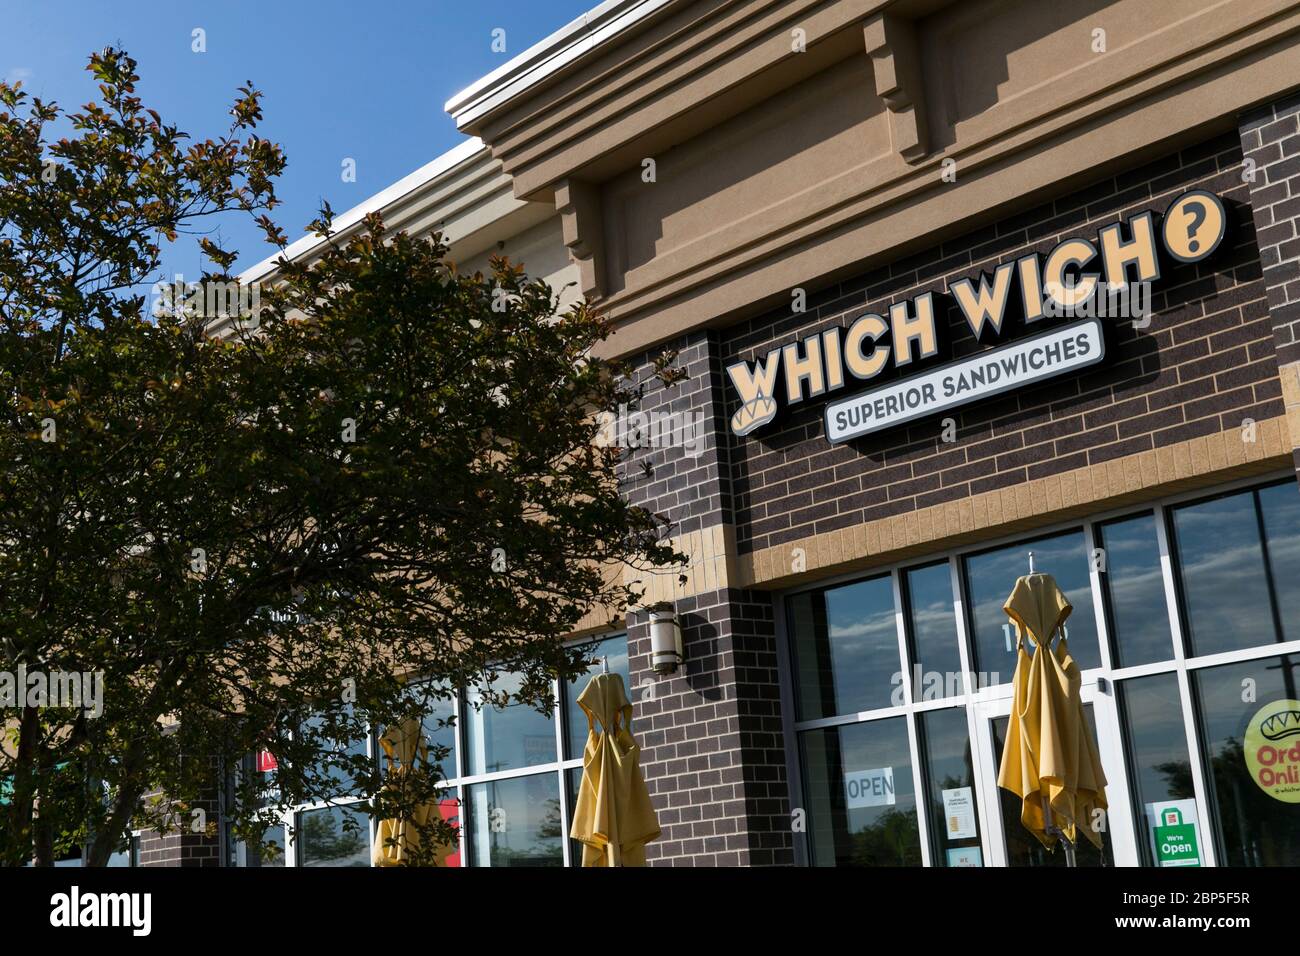 A logo sign outside of a Which Wich Superior Sandwiches restaurant location in Midlothian, Virginia on May 13, 2020. Stock Photo